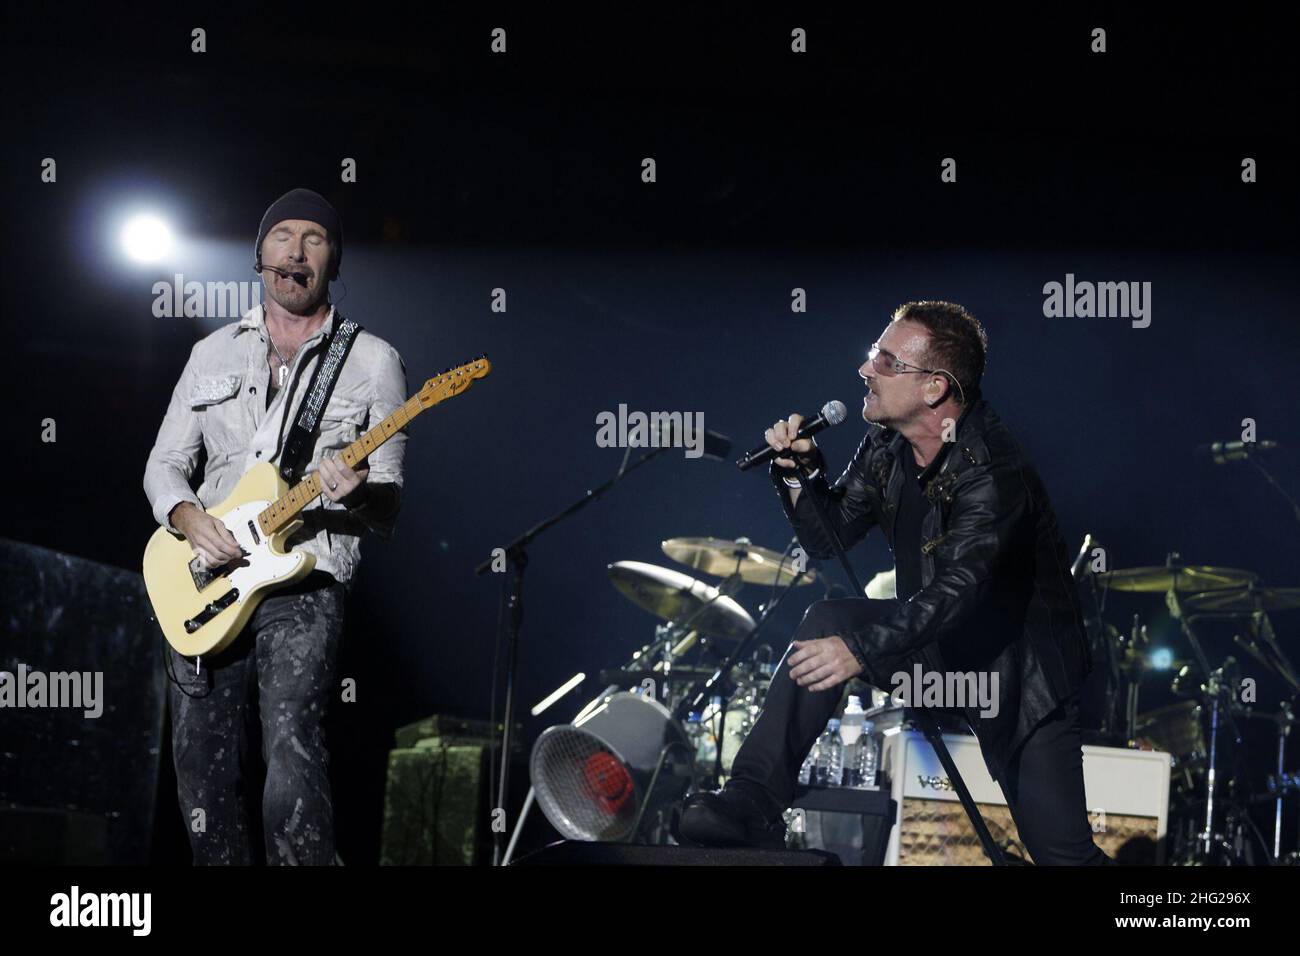 The Edge (l) and Bono (r) from the band U2 perform in concert at the ' Charles Ehrmann' stadium as part of their 360 degree Tour in Nice, France Stock Photo